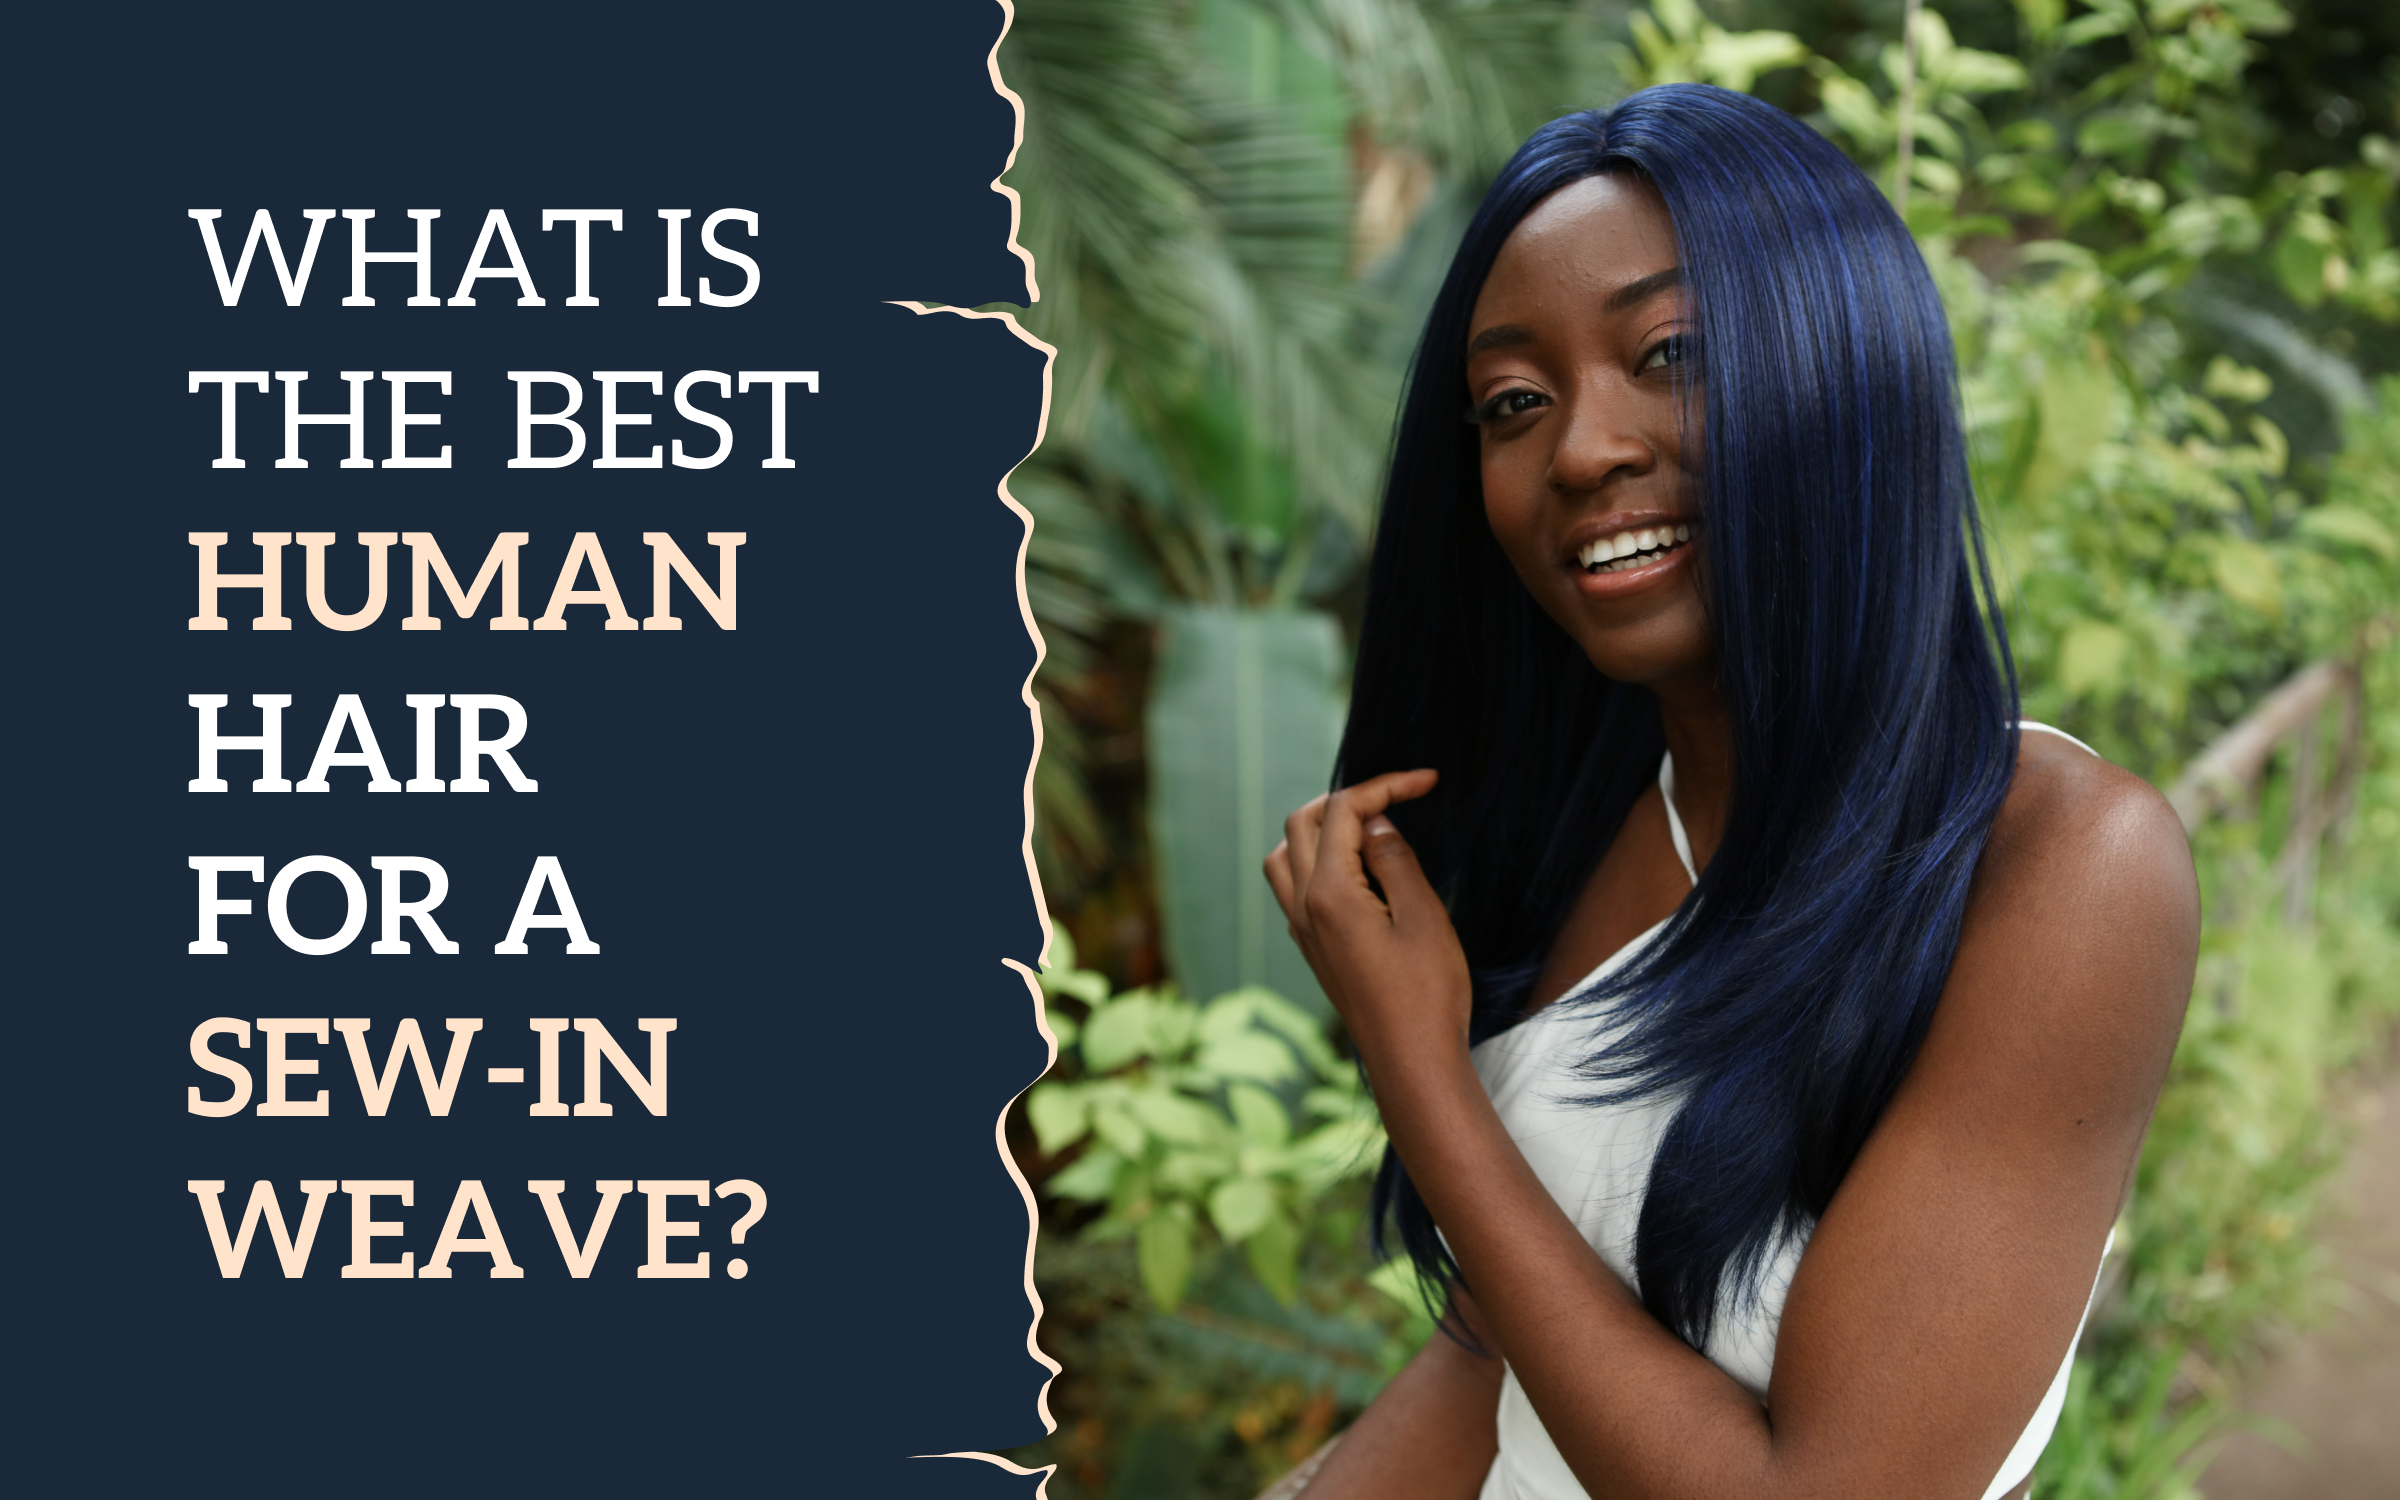 What is the best human hair for a Sew-in weave?